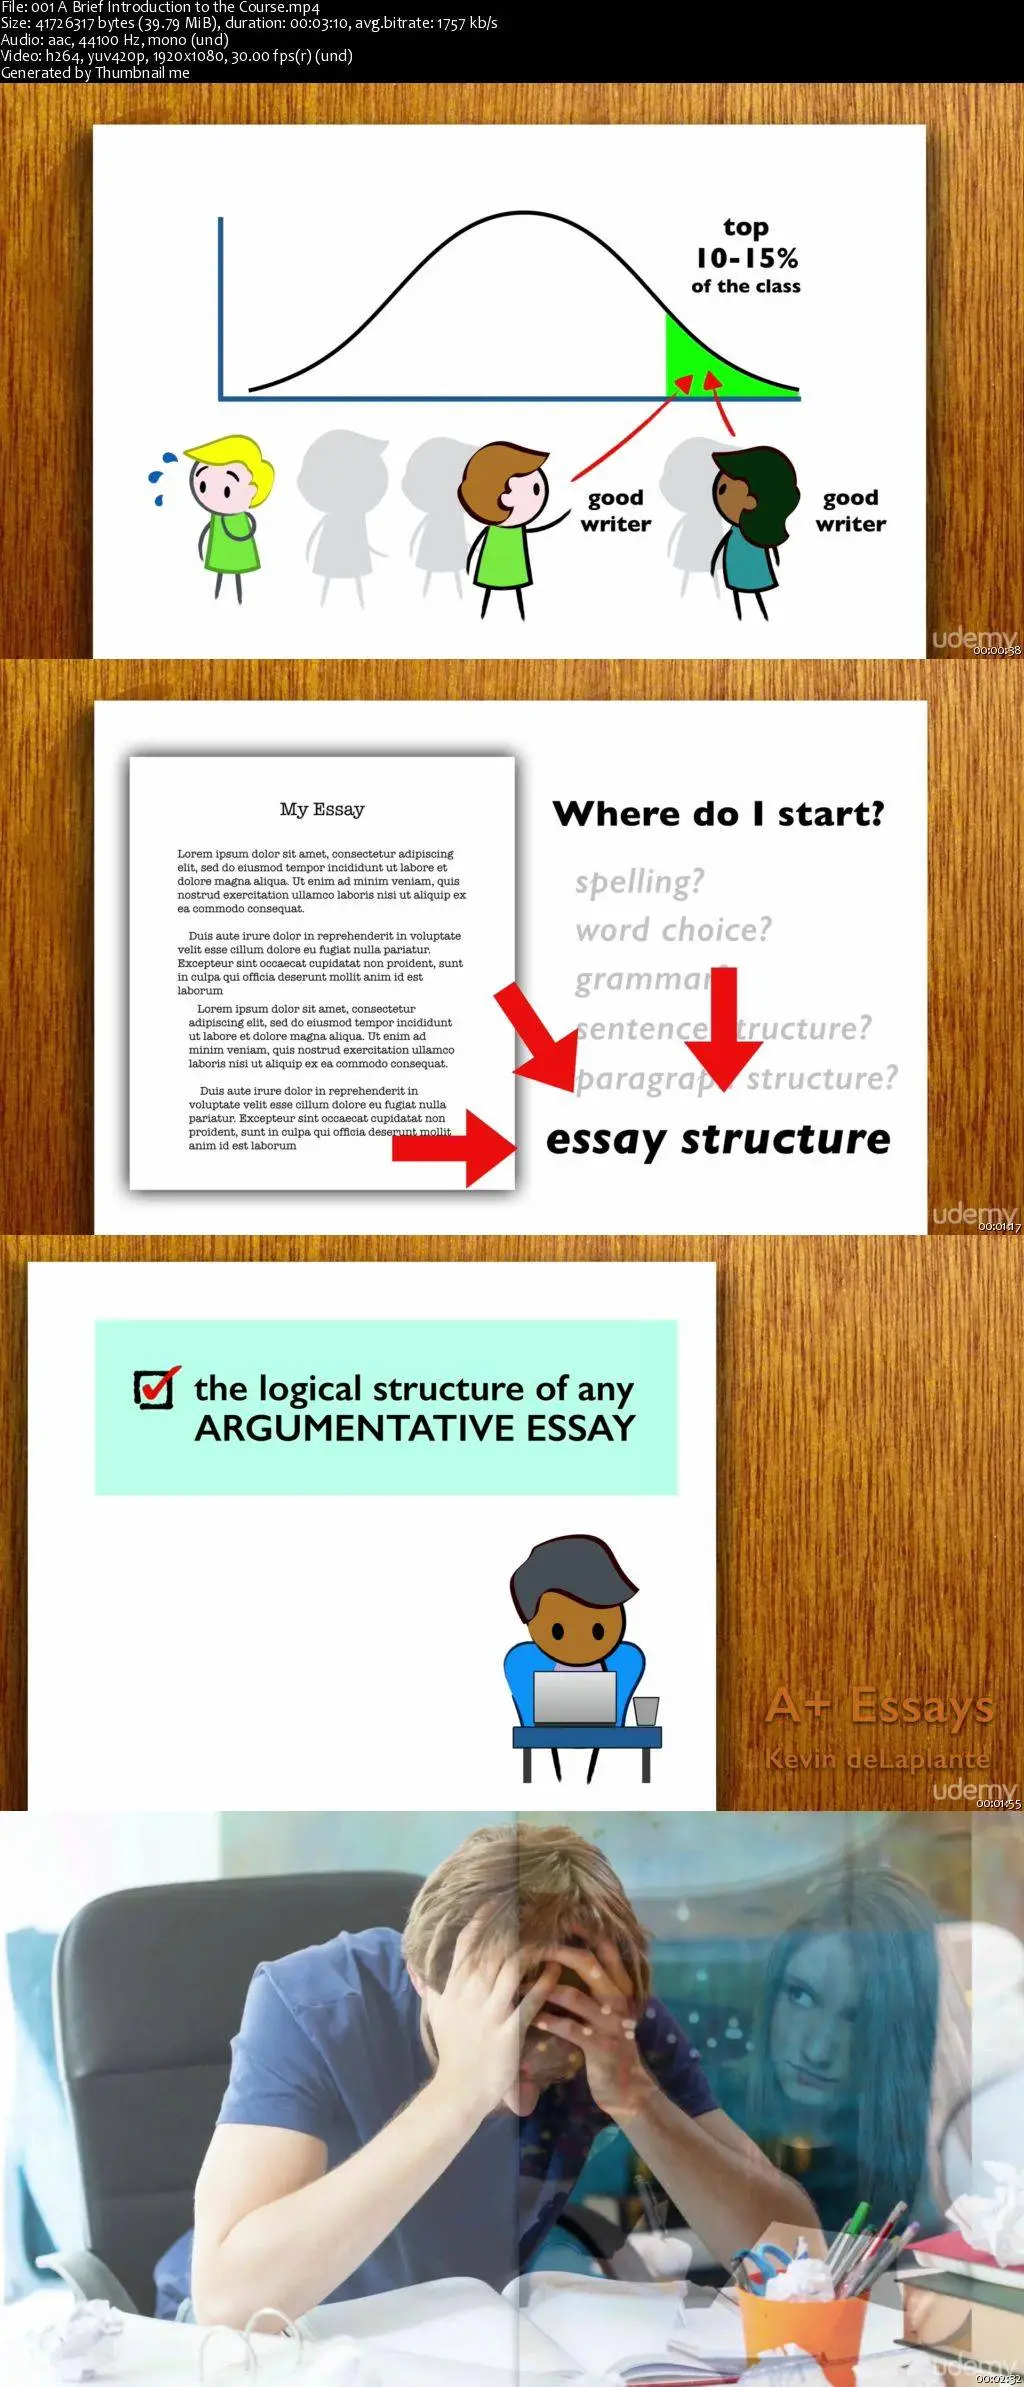 approach in essay writing